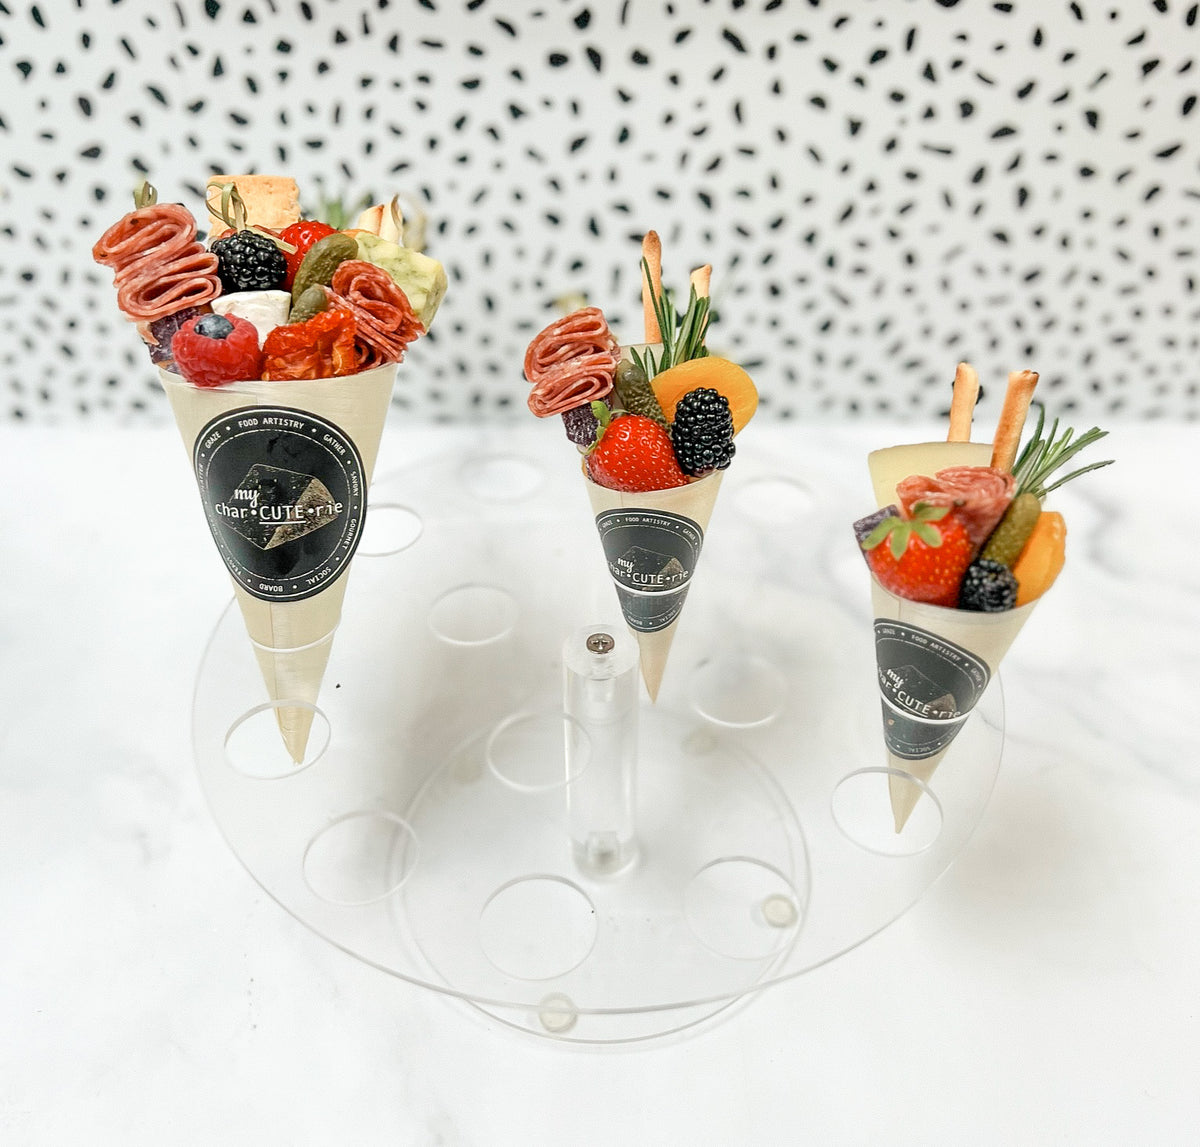 Savory CharCUTErie Cones